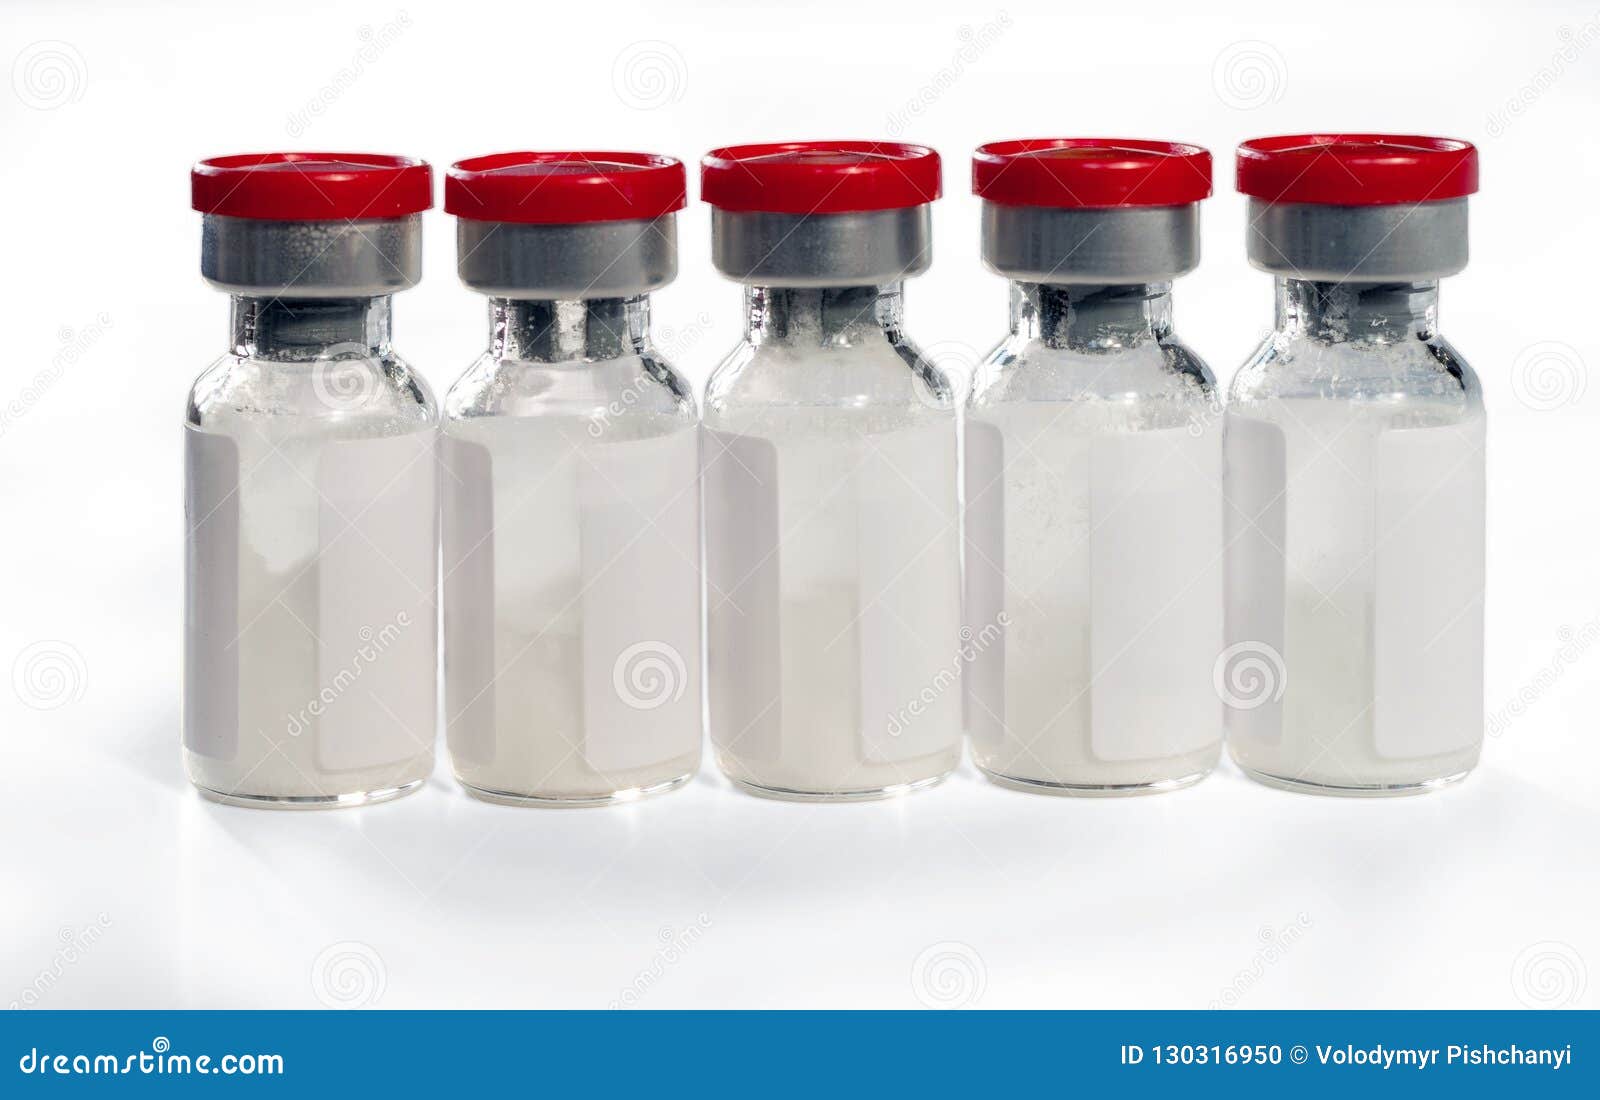 glass medical vials of biotech drugs with red caps.  on white background